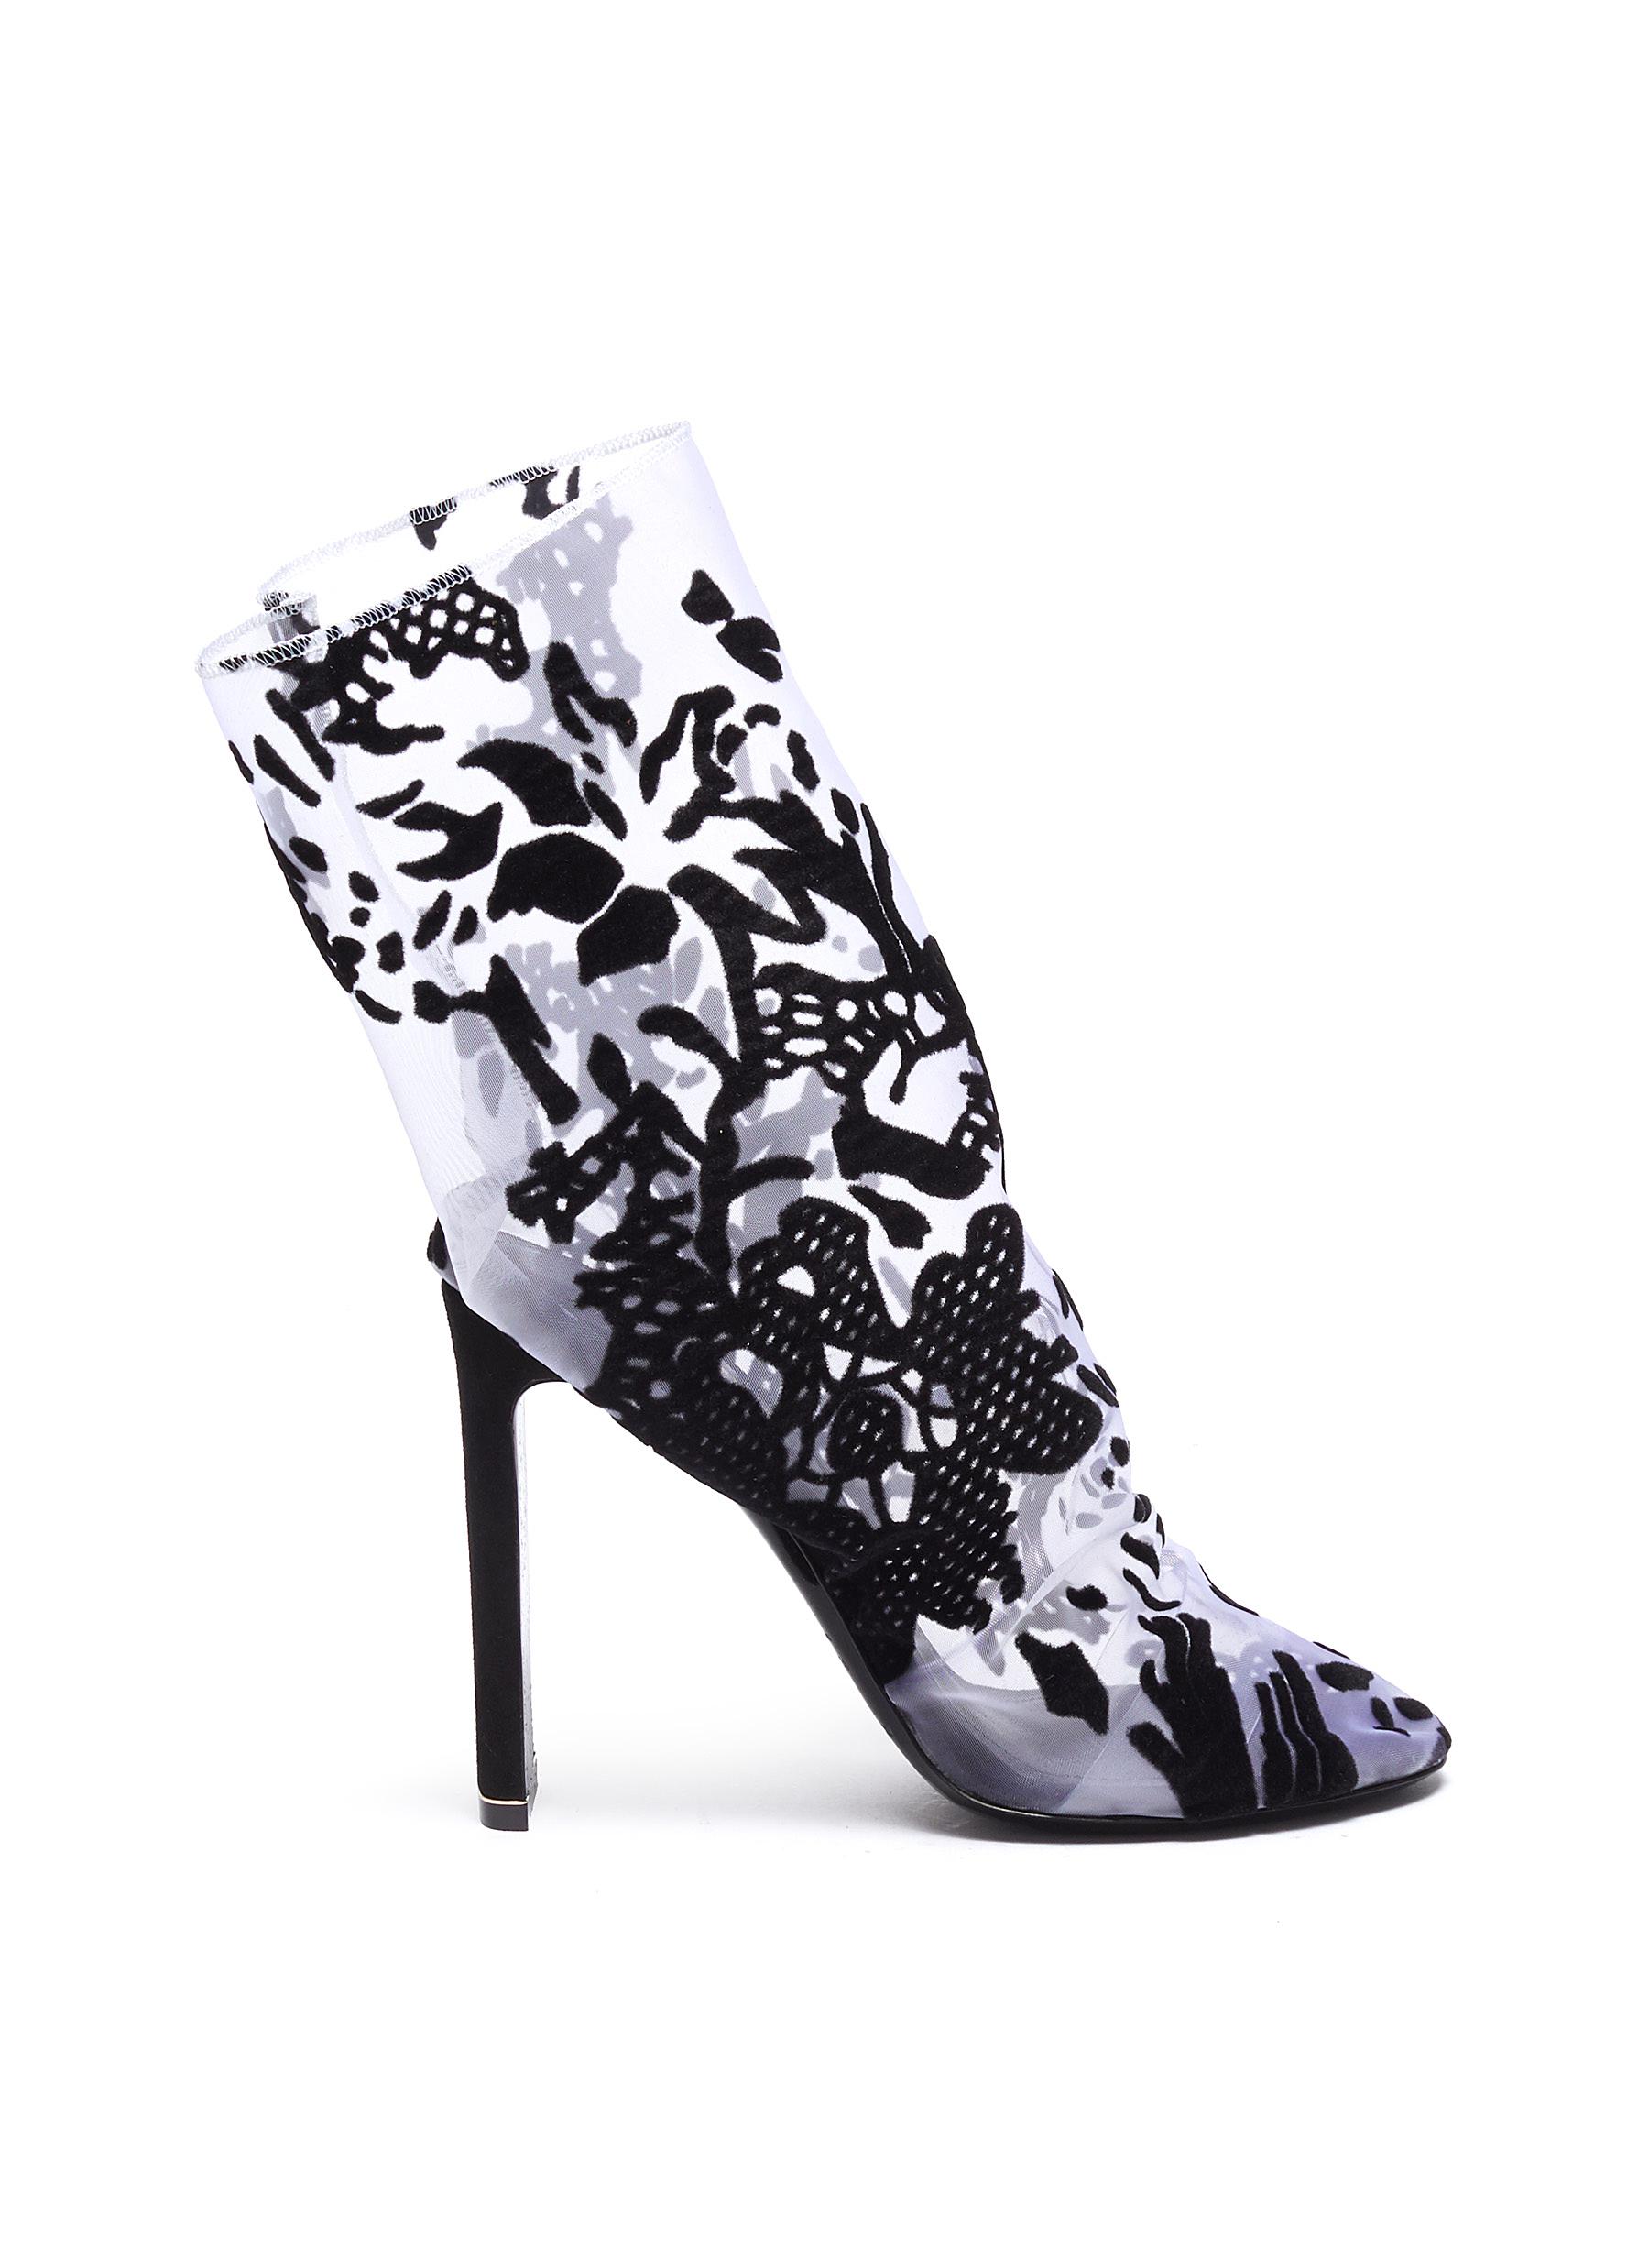 DArcy Motion floral flocked velvet organza ankle boots by Nicholas Kirkwood